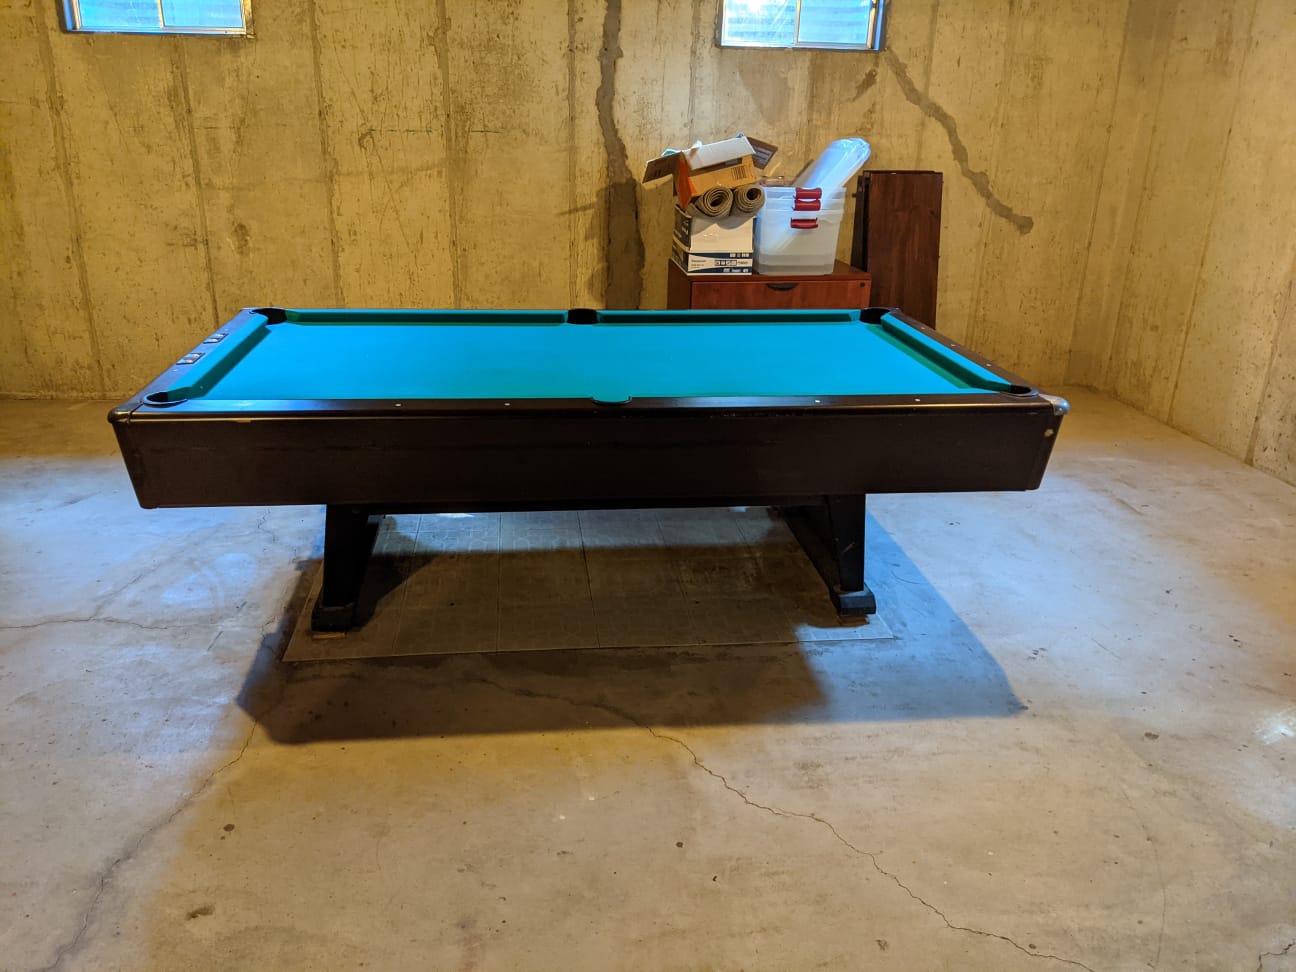 S0L0® Chicago - 8 ft. Minnesota Fats Pool Table in fair condition local ...